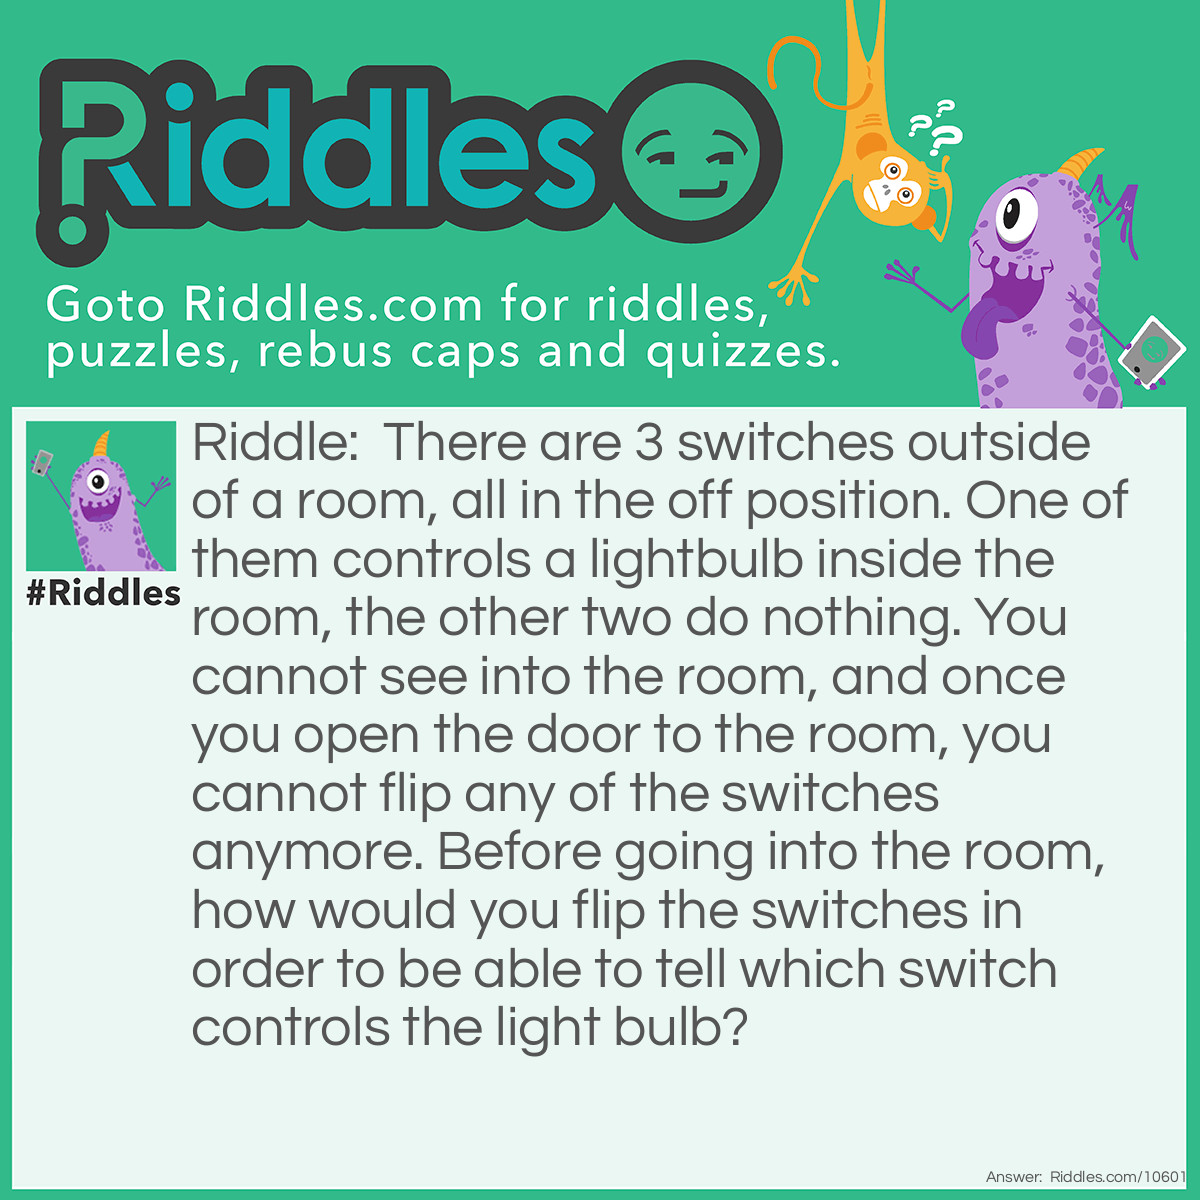 Riddle: There are 3 switches outside of a room, all in the off position. One of them controls a lightbulb inside the room, the other two do nothing. You cannot see into the room, and once you open the door to the room, you cannot flip any of the switches anymore. Before going into the room, how would you flip the switches in order to be able to tell which switch controls the light bulb? Answer: lip the first switch and keep it flipped for five minutes. Then unflip it, and flip the second switch. Go into the room. If the lightbulb is off but warm, the first switch controls it. If the light is on, the second switch controls it. If the light is off and cool, the third switch controls it.